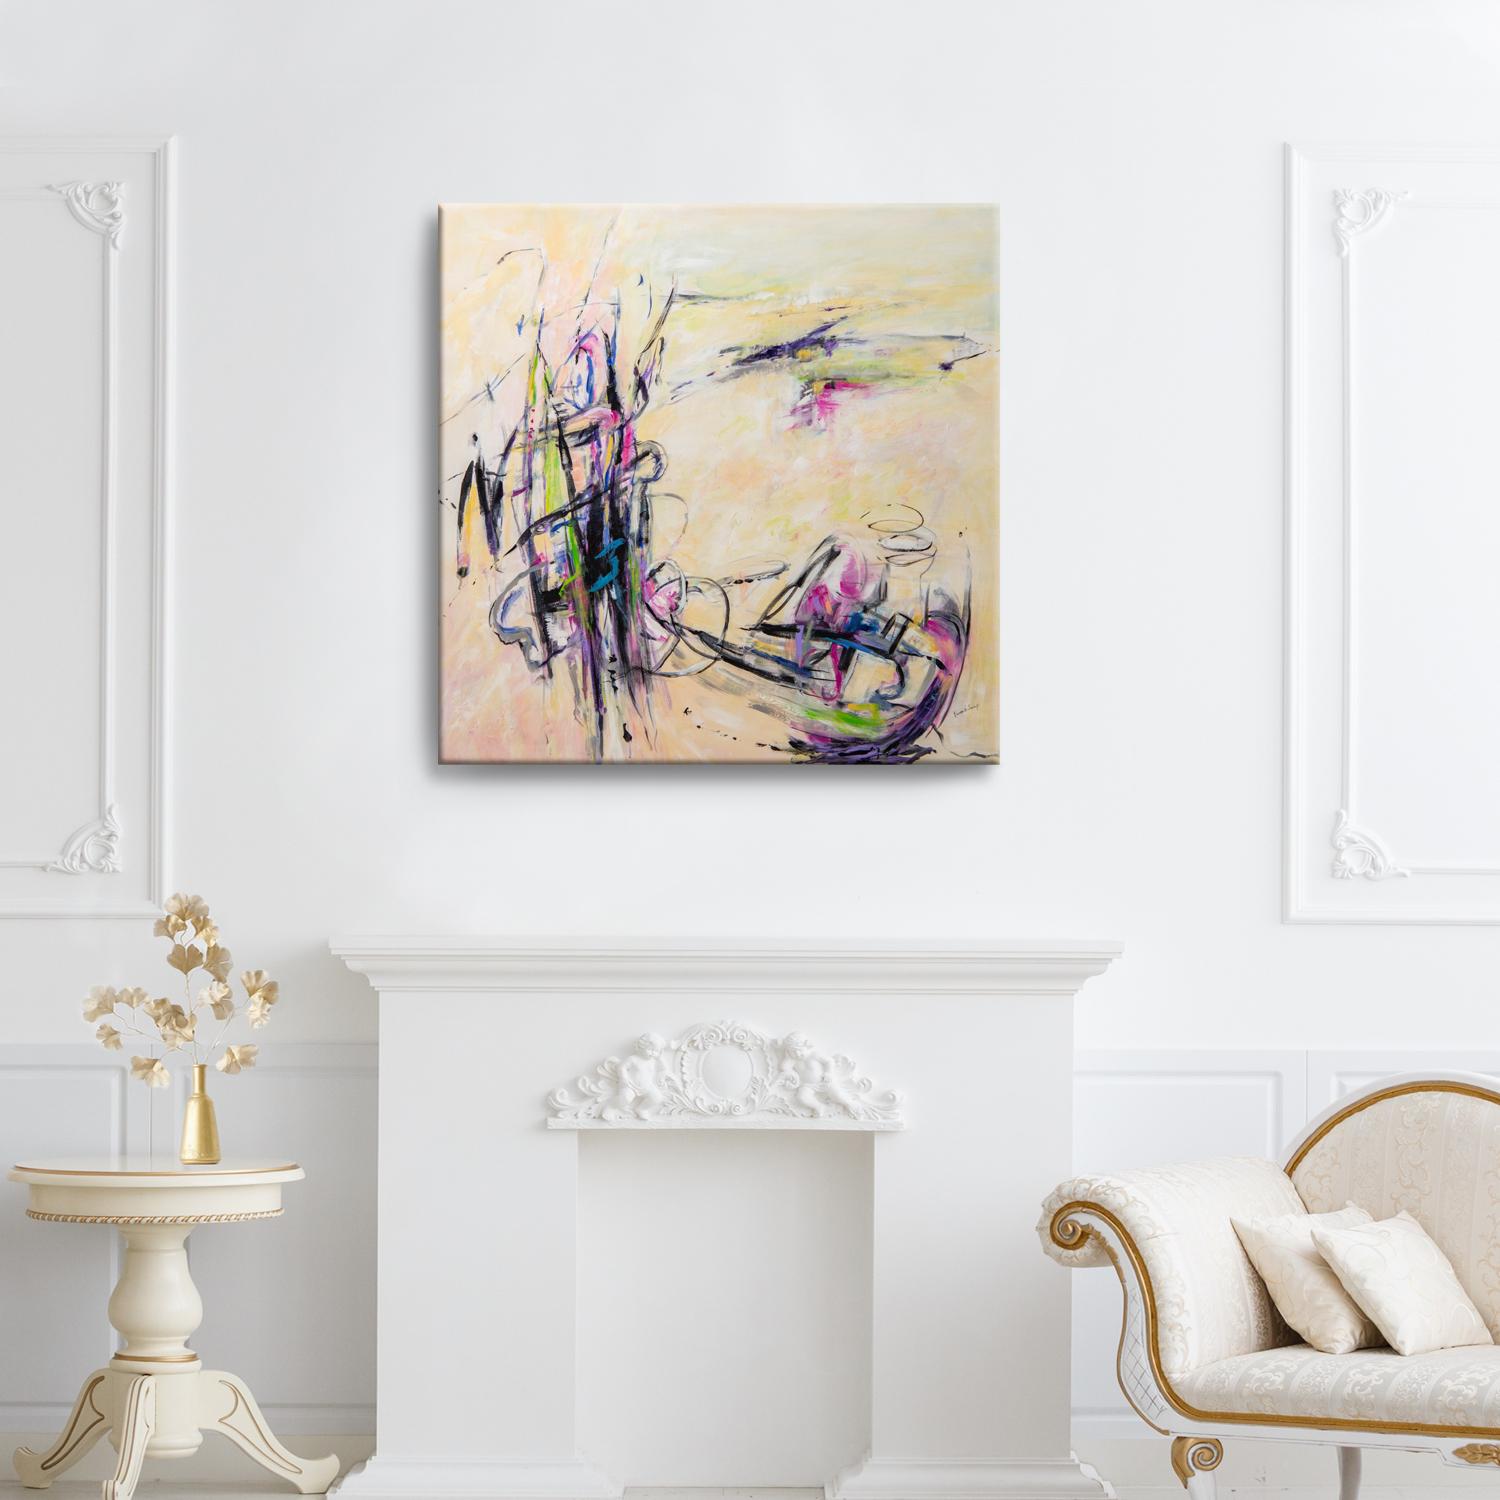 'Tie the Knot' Wrapped Canvas Original Painting features an energetic abstract aesthetic in vibrant tones of beige, purple, magenta, green, yellow, blue, blush, and, black. Modern divinity expressed on canvas, Karen H. Salup’s work exhibits a